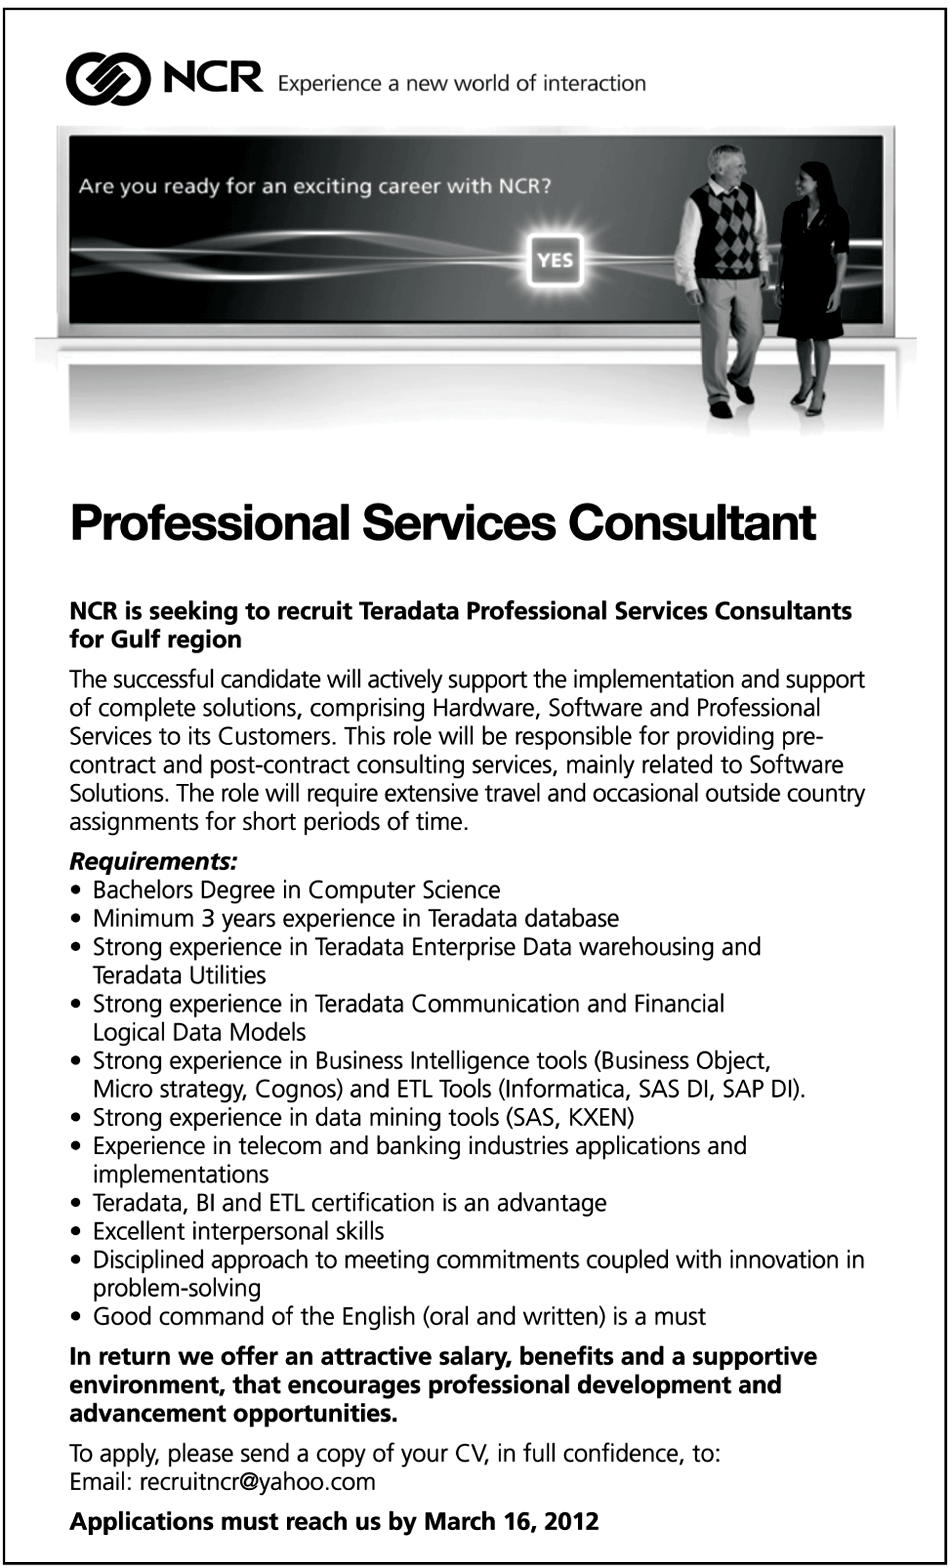 NCR Requires the Services of Teradata Professional Consultants